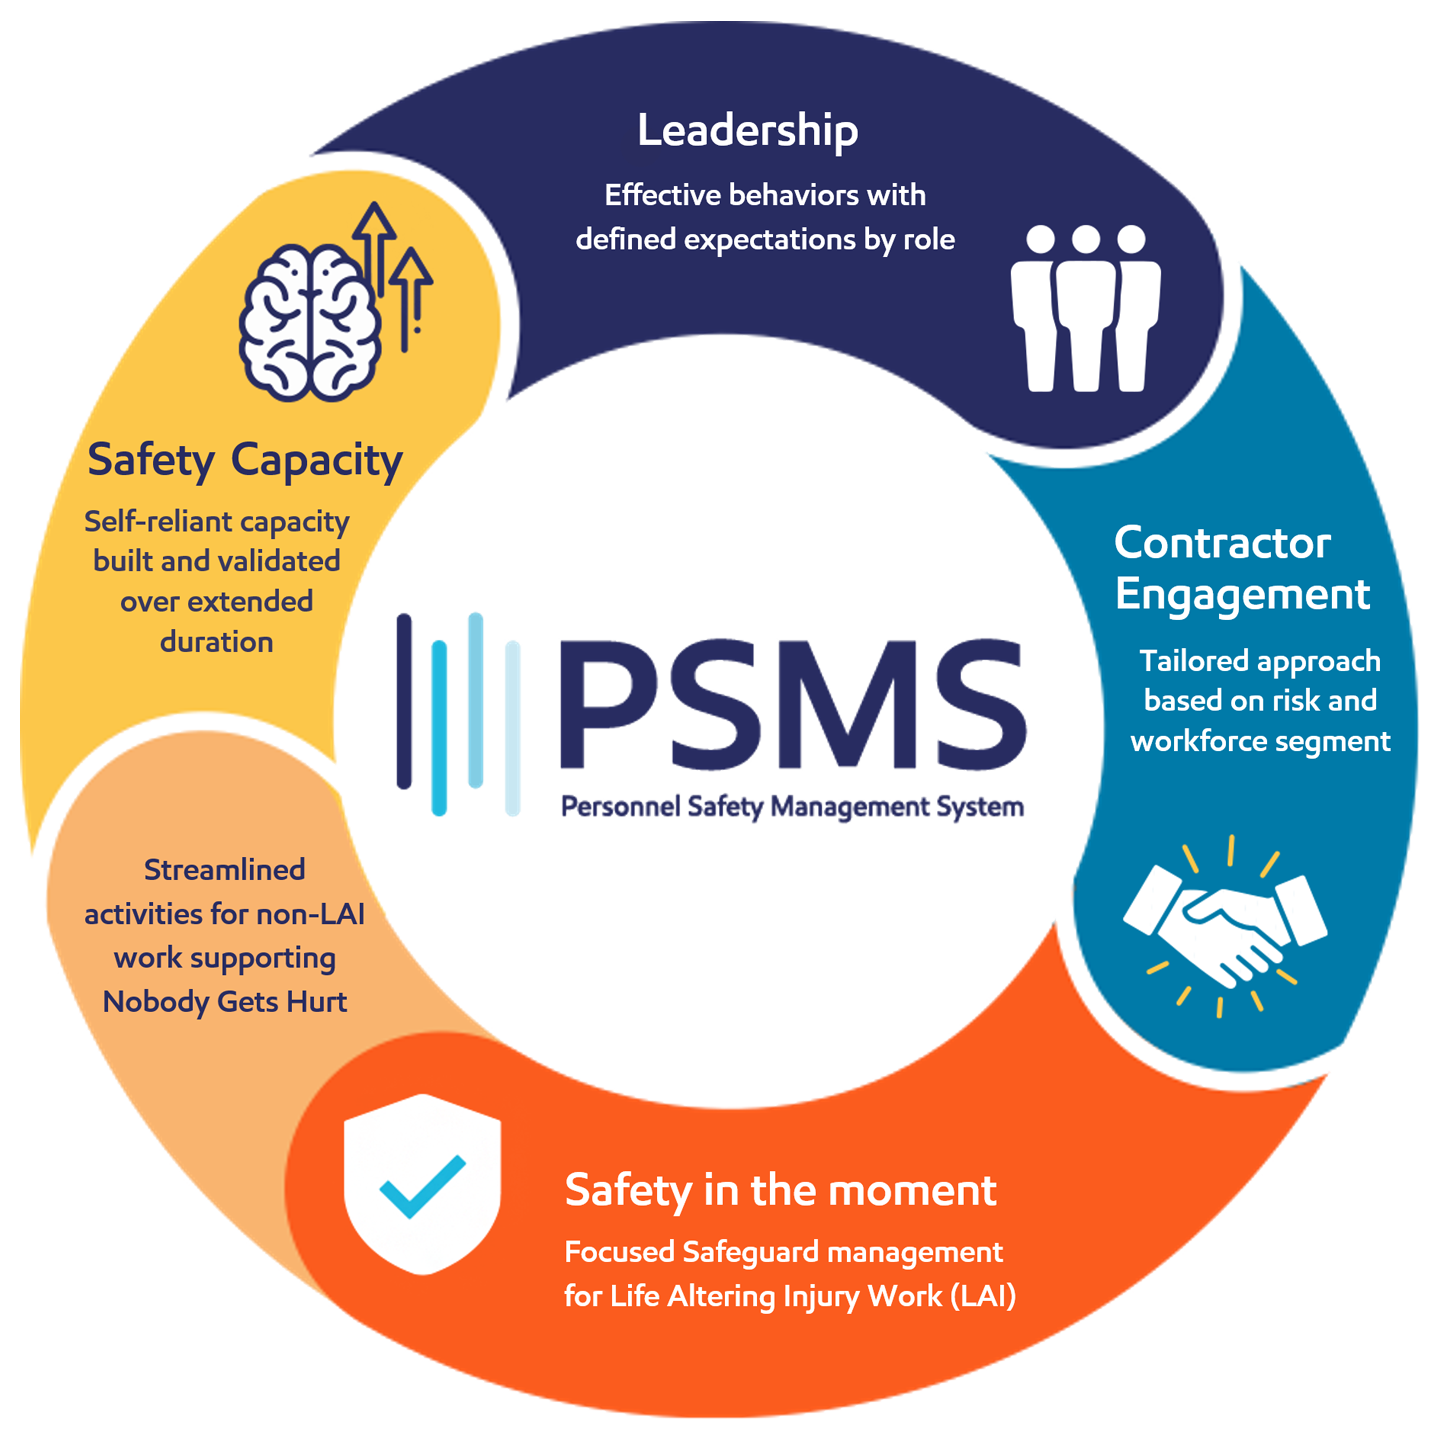 Image The key components of PSMS include: